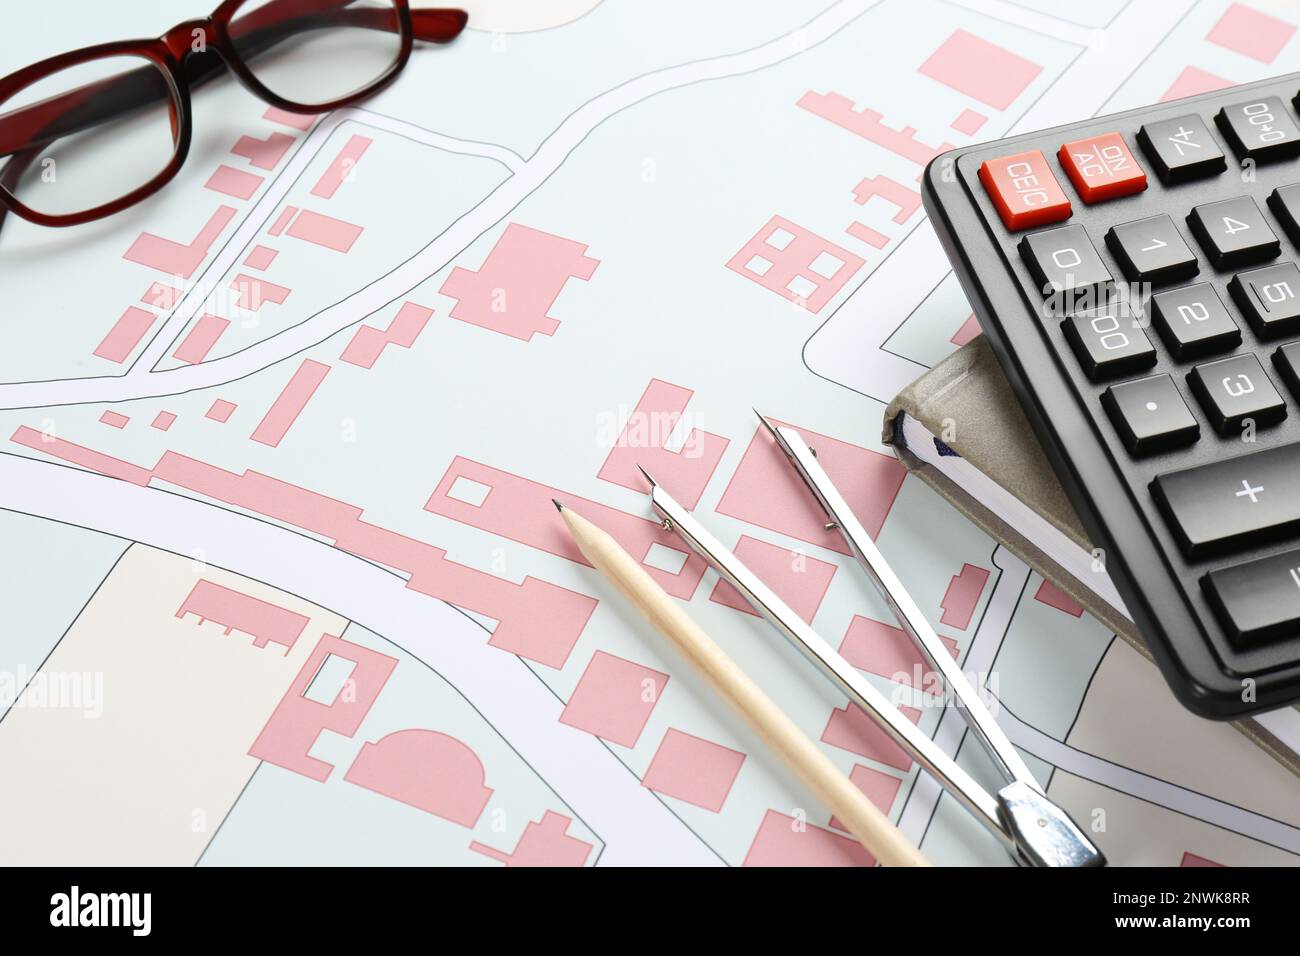 Office stationery and eyeglasses on cadastral map of territory with buildings Stock Photo